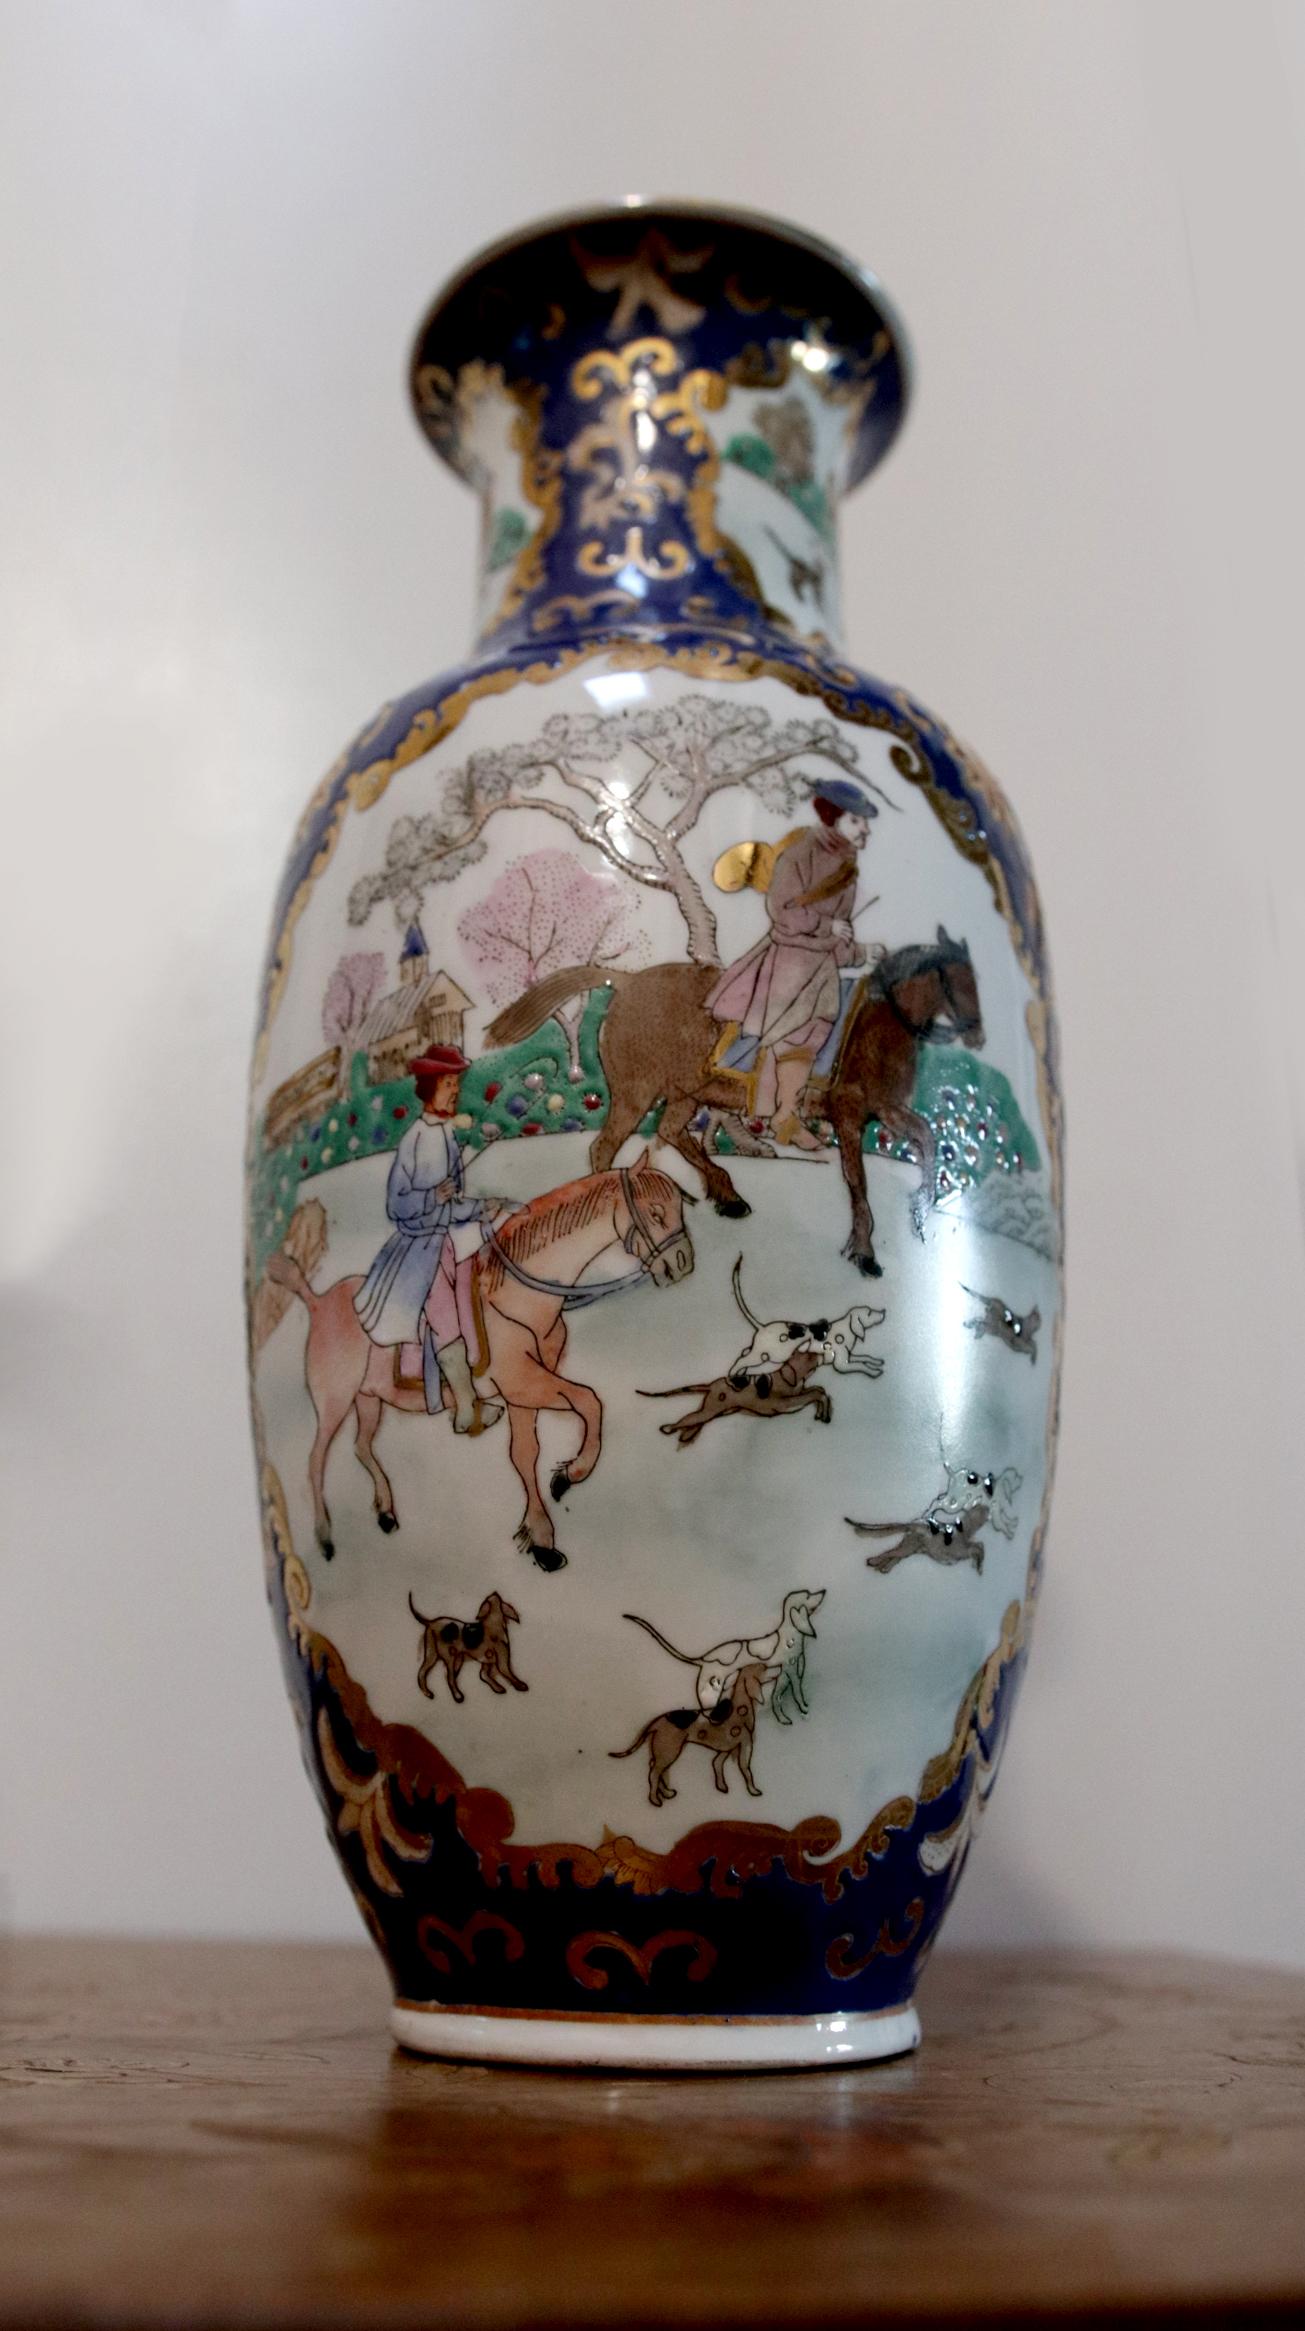 The hunting scene with Asian characters and hunting dogs are one of the compelling subjects of this vase. The detail includes several dogs of different breeds. The vase is a mid to late 20th century Baluster Vase or a meiping vase. It is